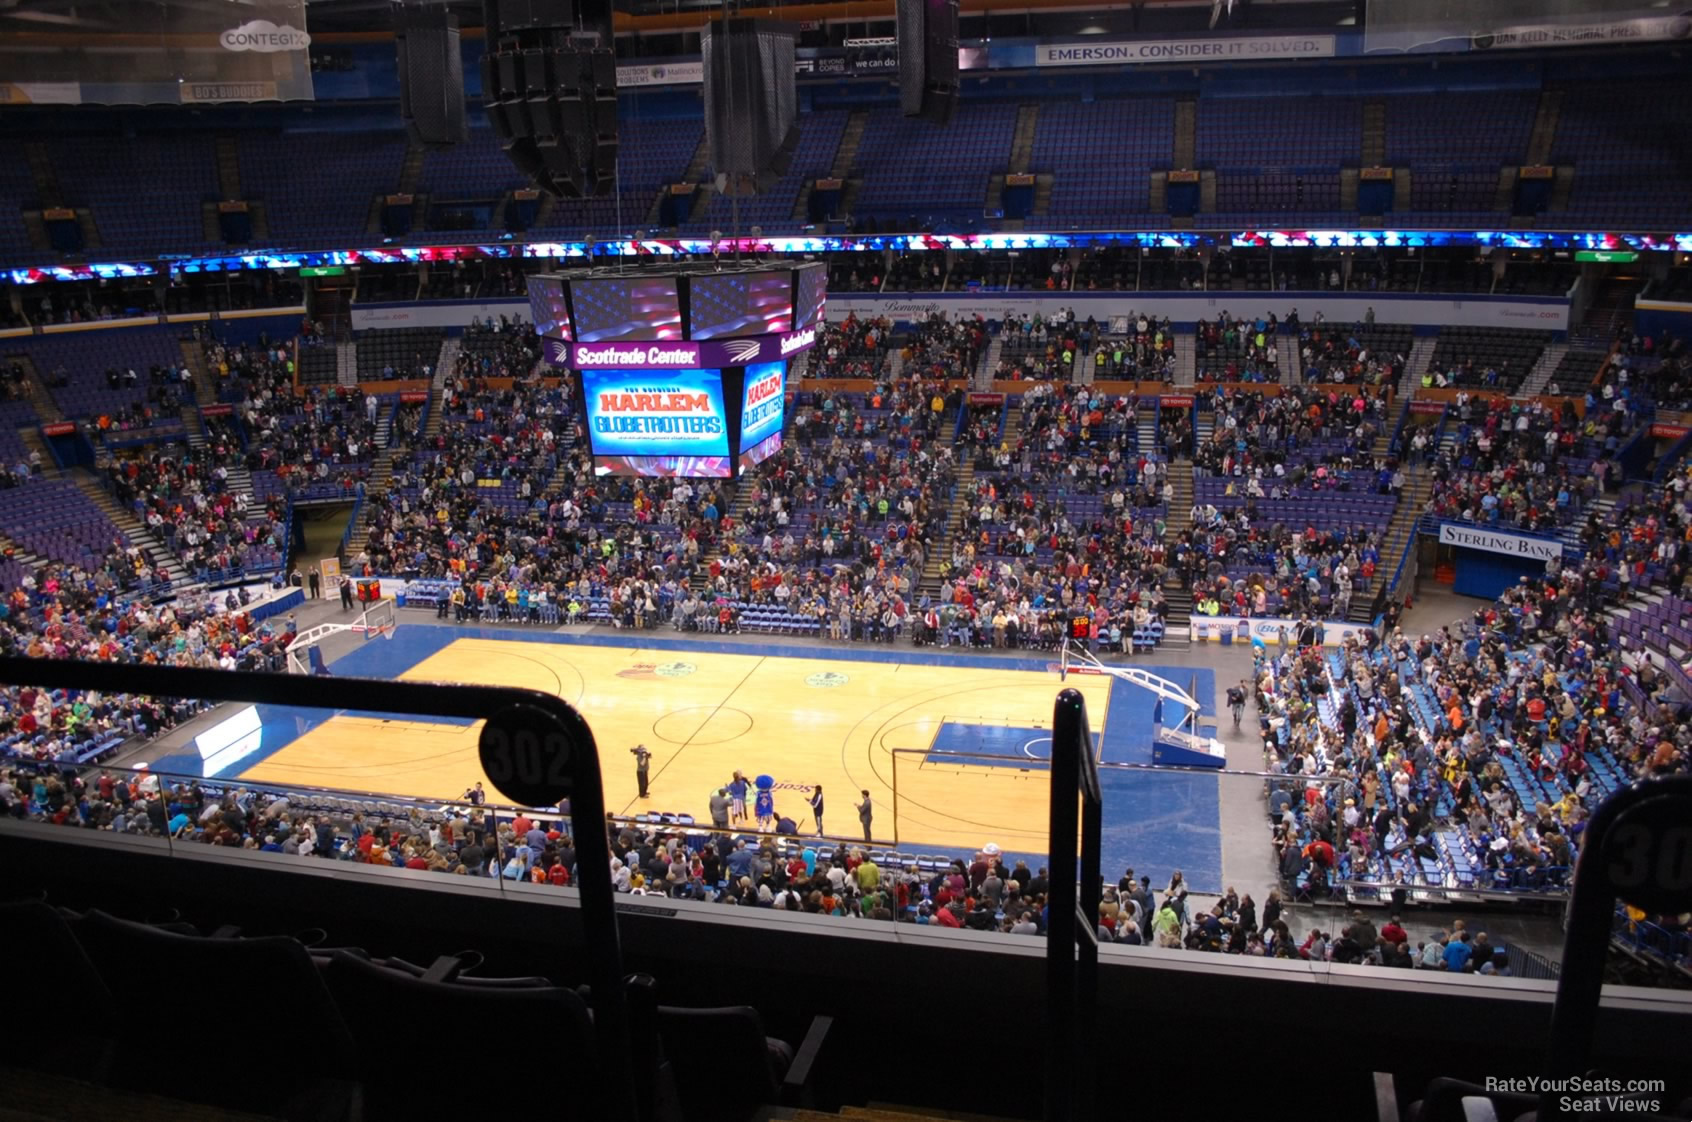 section 301, row c seat view  for basketball - enterprise center